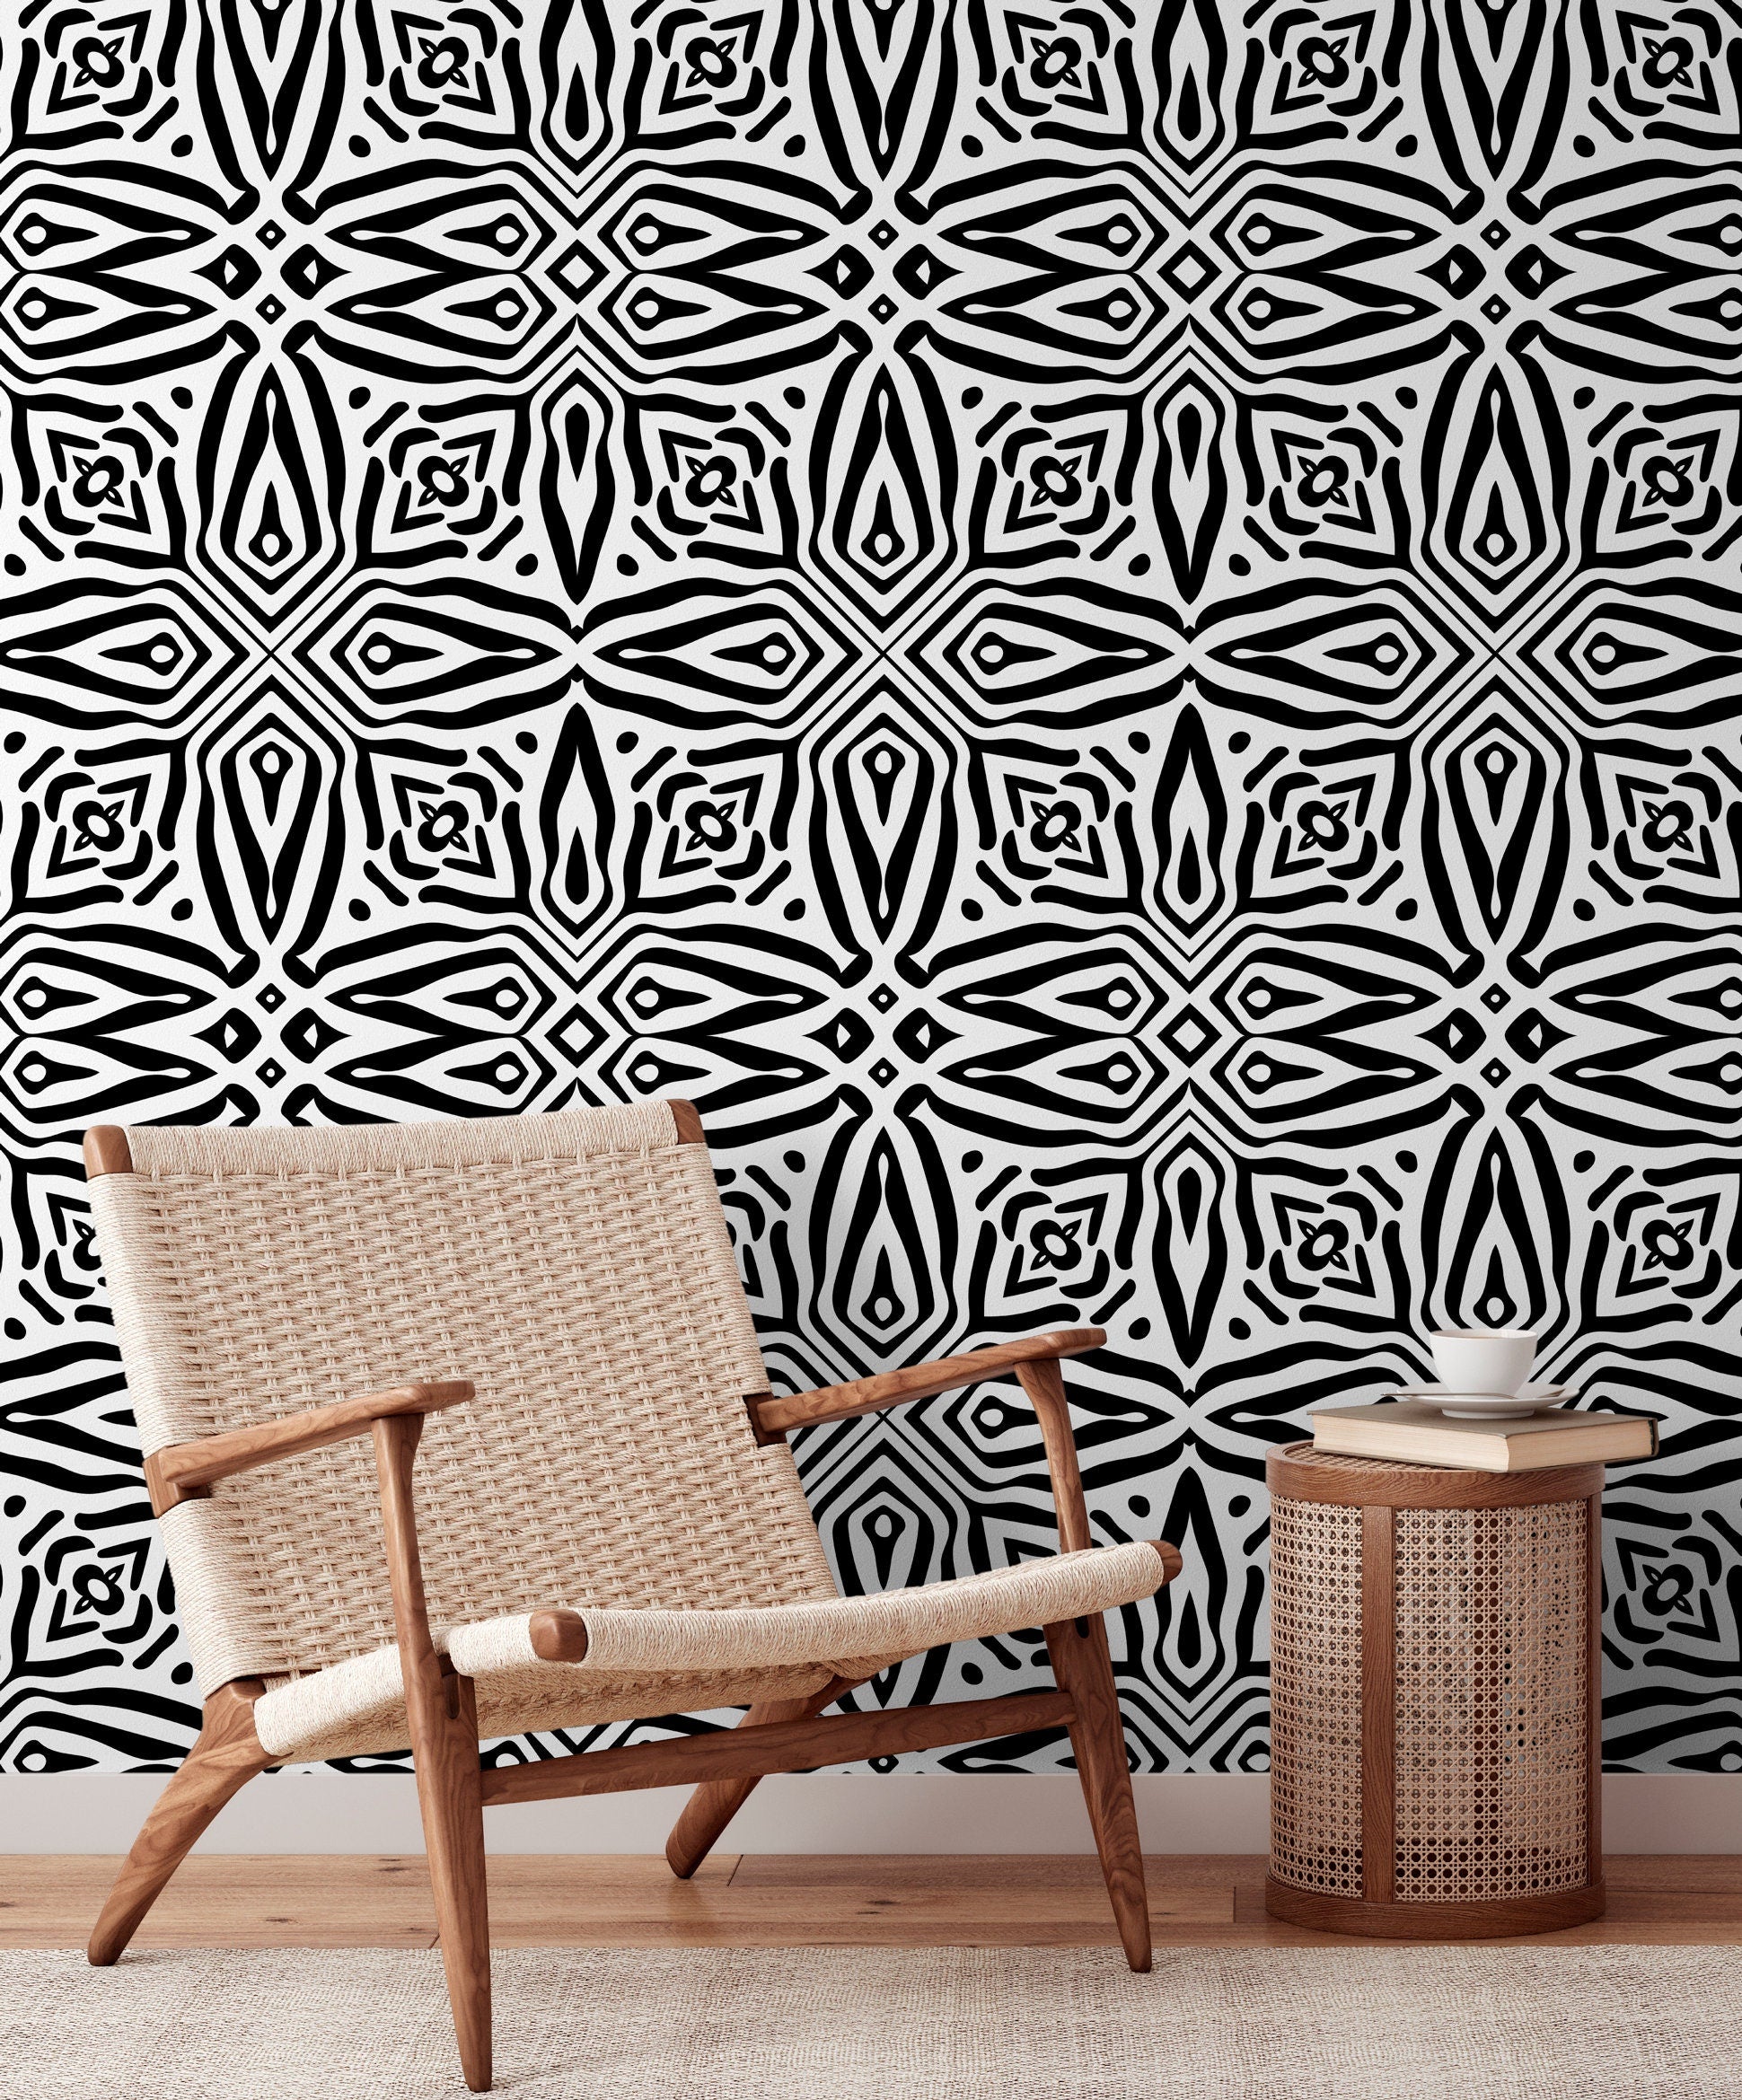 Wallpaper Peel and Stick Wallpaper Removable Wallpaper Home Decor Wall Art Wall Decor Room Decor / African Black and White Wallpaper - C392